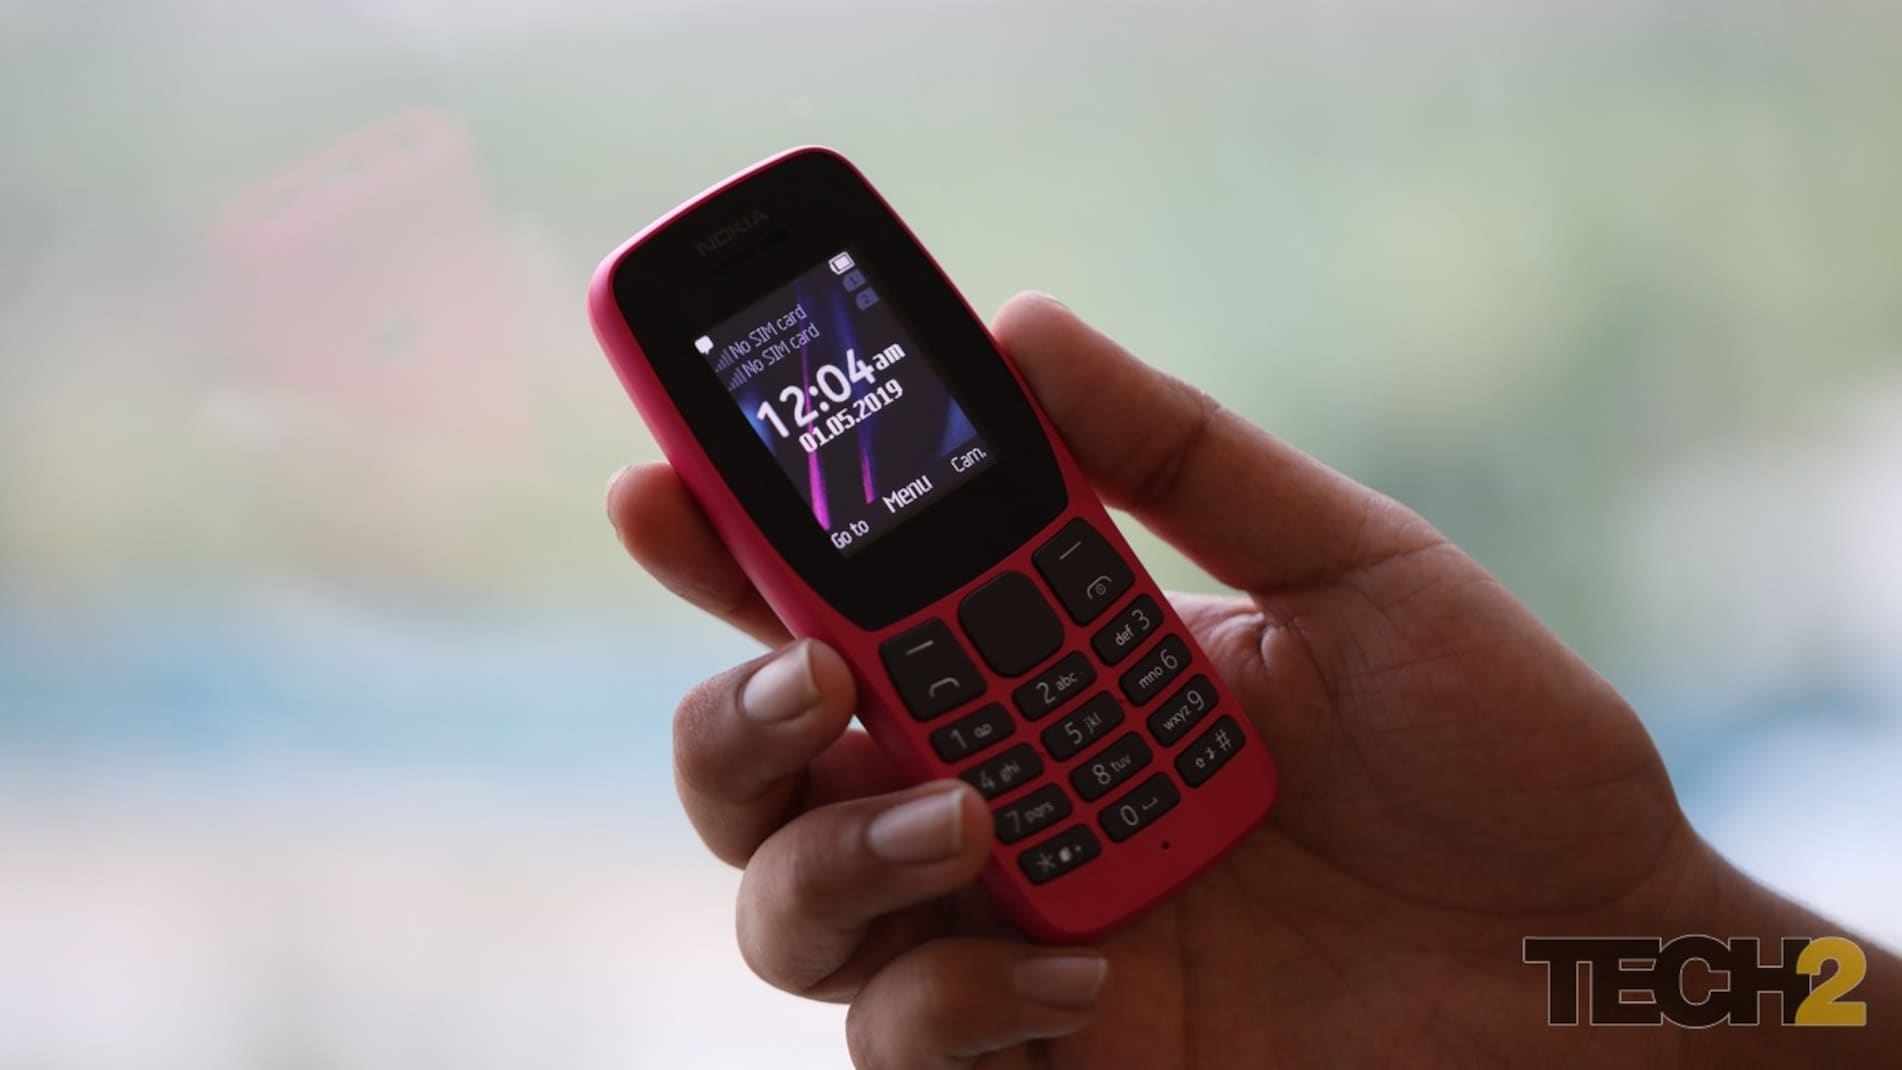 Nokia 110 feature phone has been announced at IFA 2019 for a price of €20.